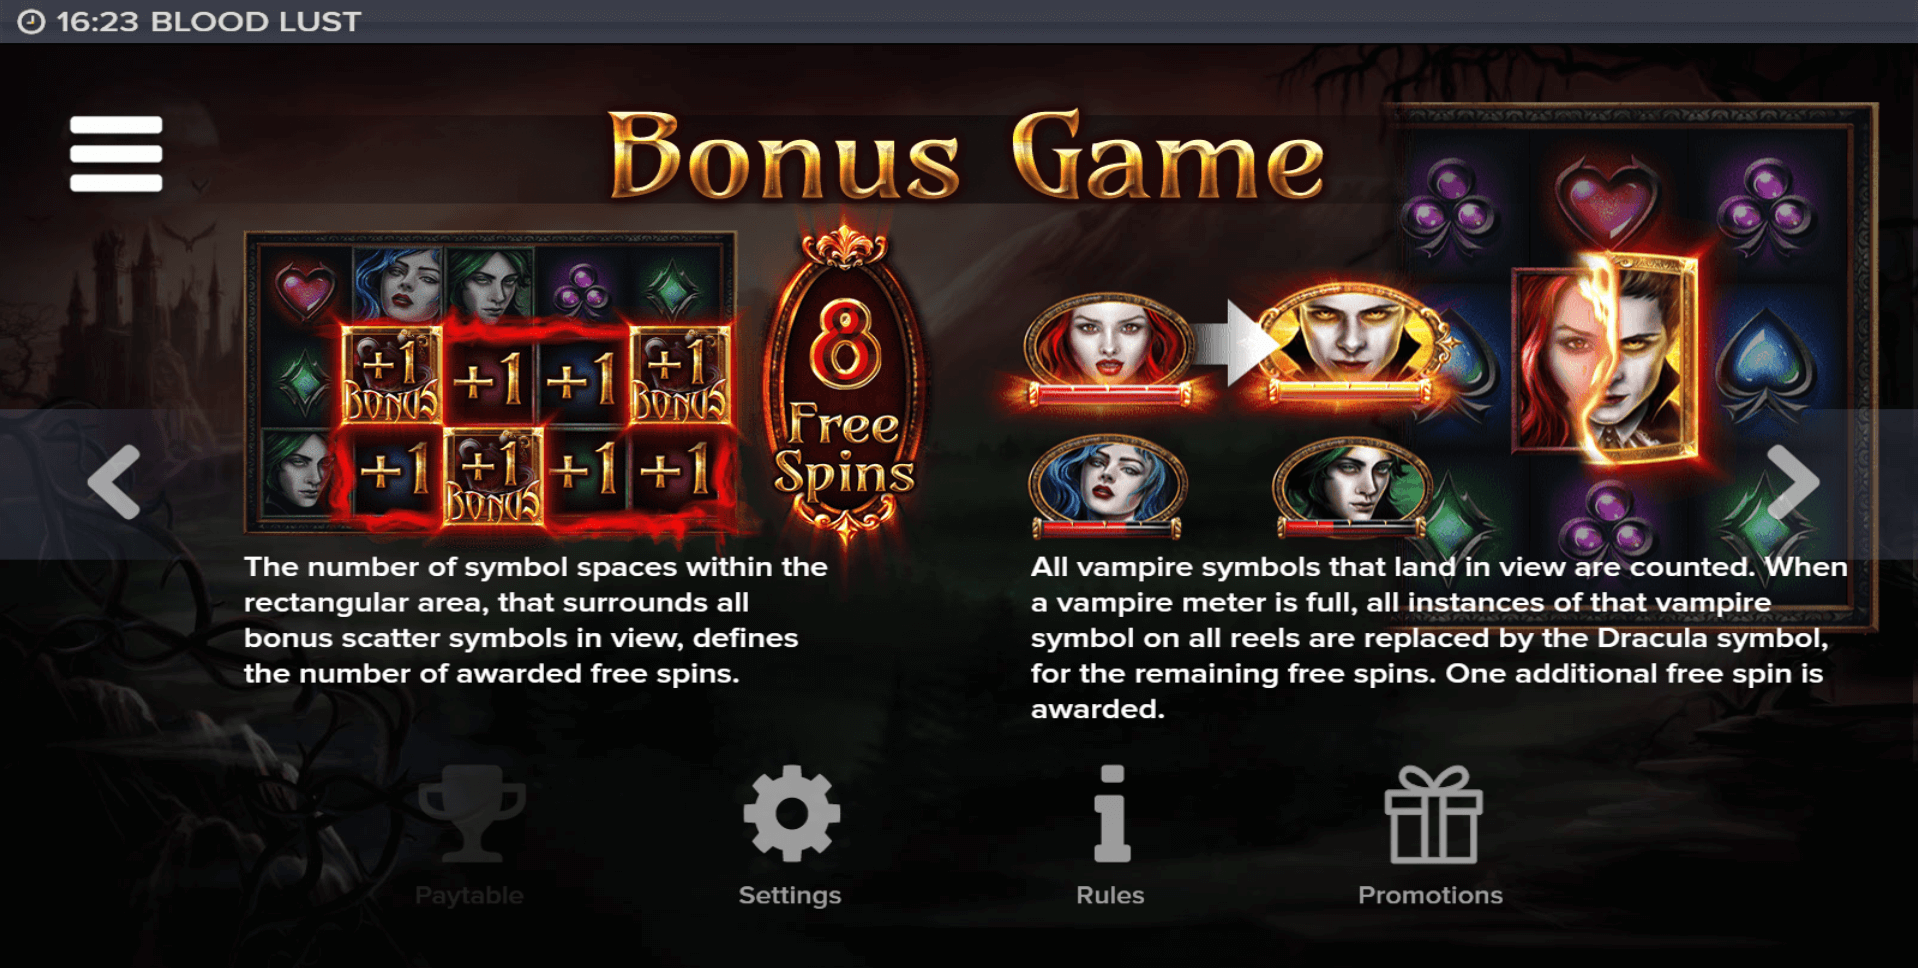 Play Wild Blood Slots with No Download Here